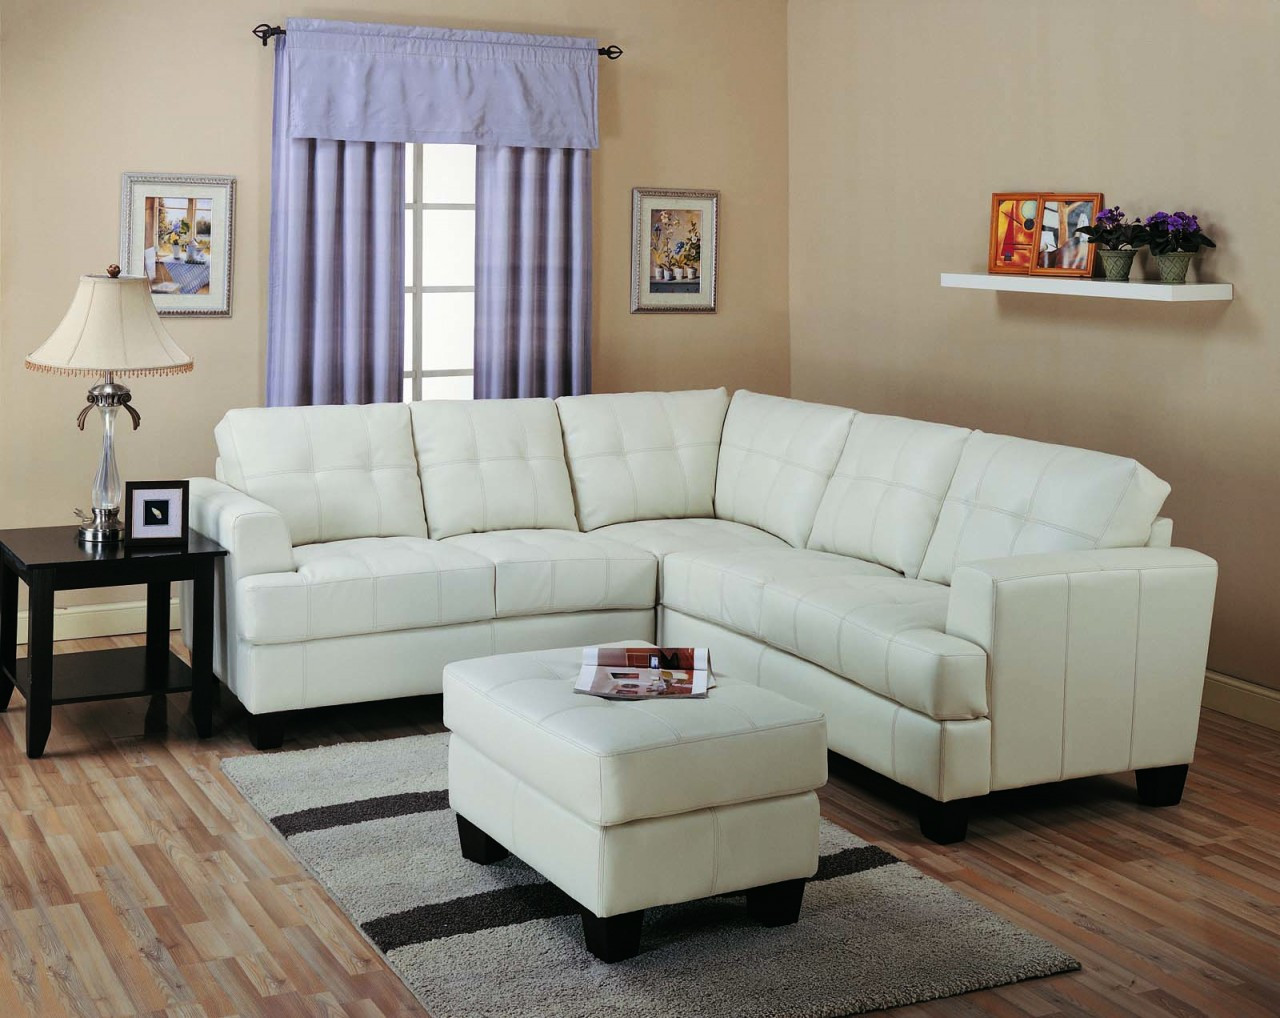 Small Living Room with Sectionals Awesome Types Of Best Small Sectional Couches for Small Living